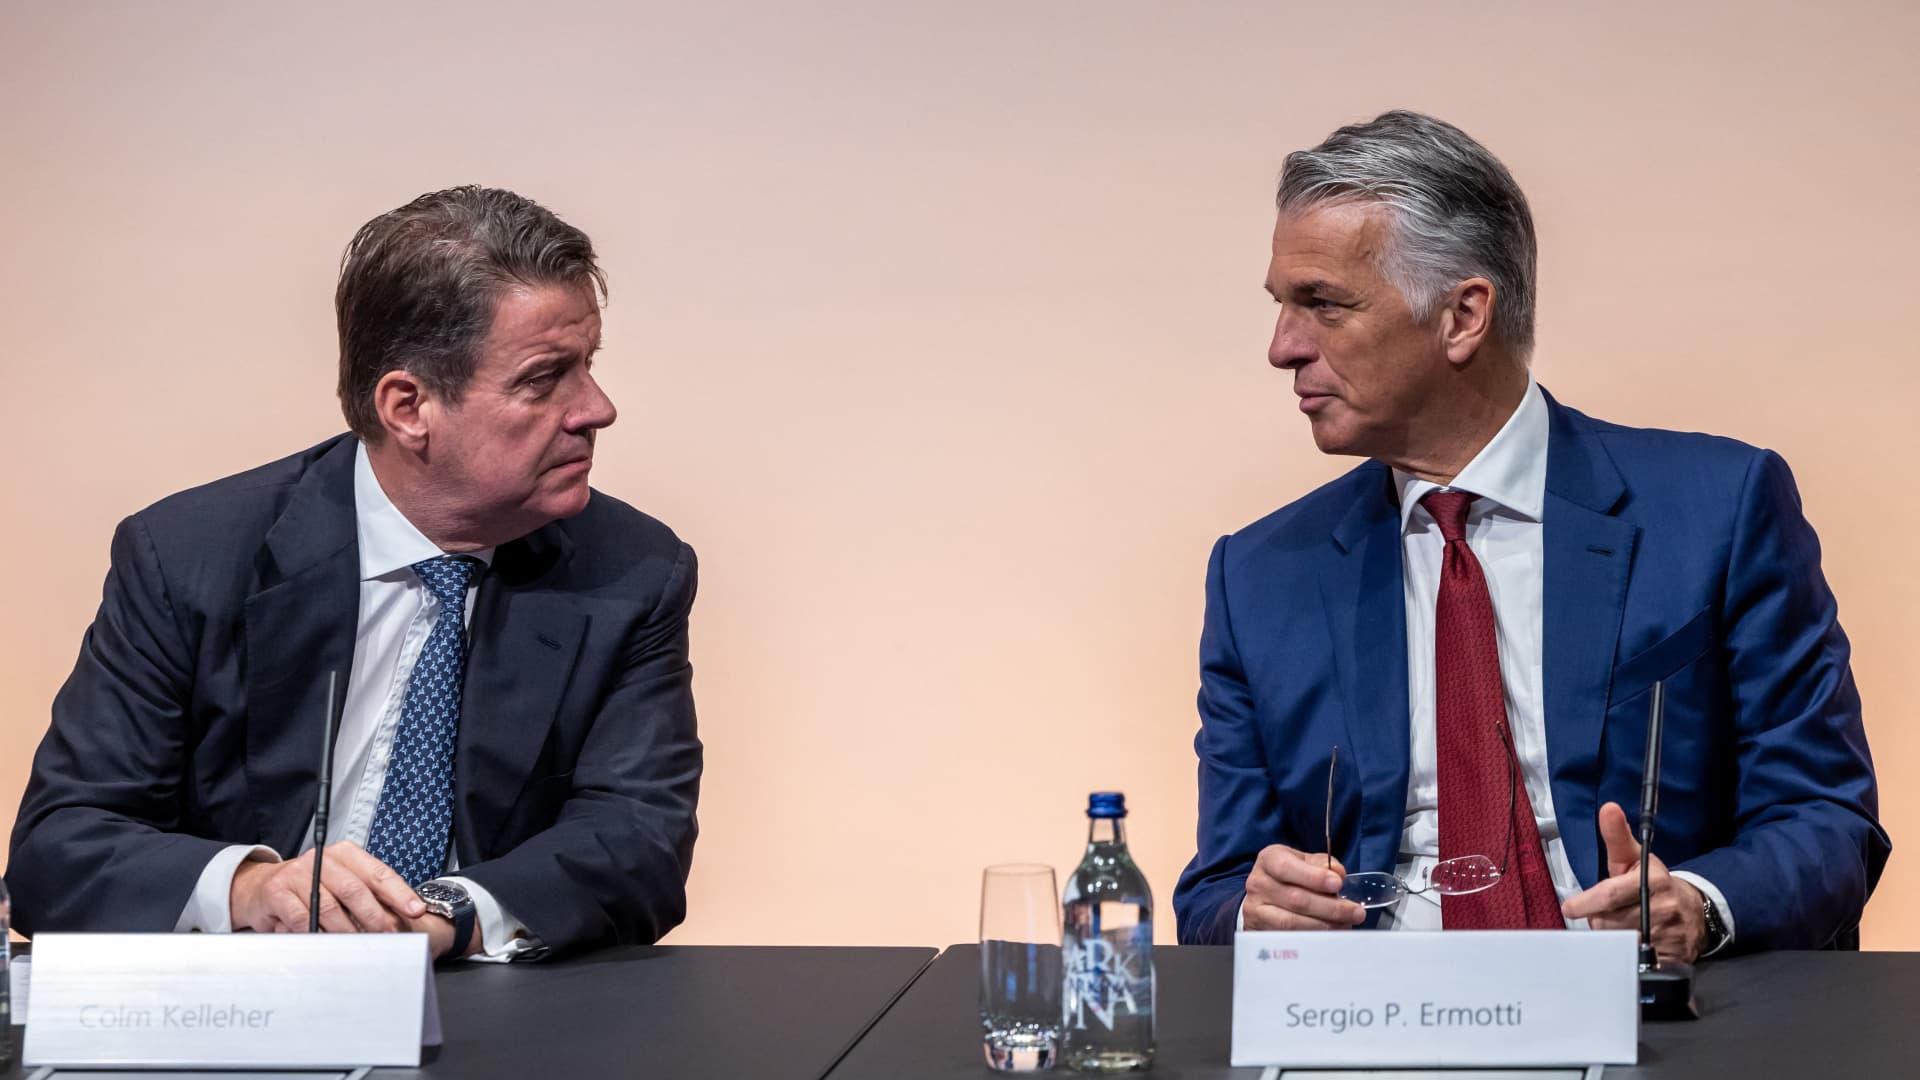 UBS CEO Sergio Ermotti (R) speaks with UBS Chairman Colm Kelleher during a press conference in Zurich on March 29, 2023.